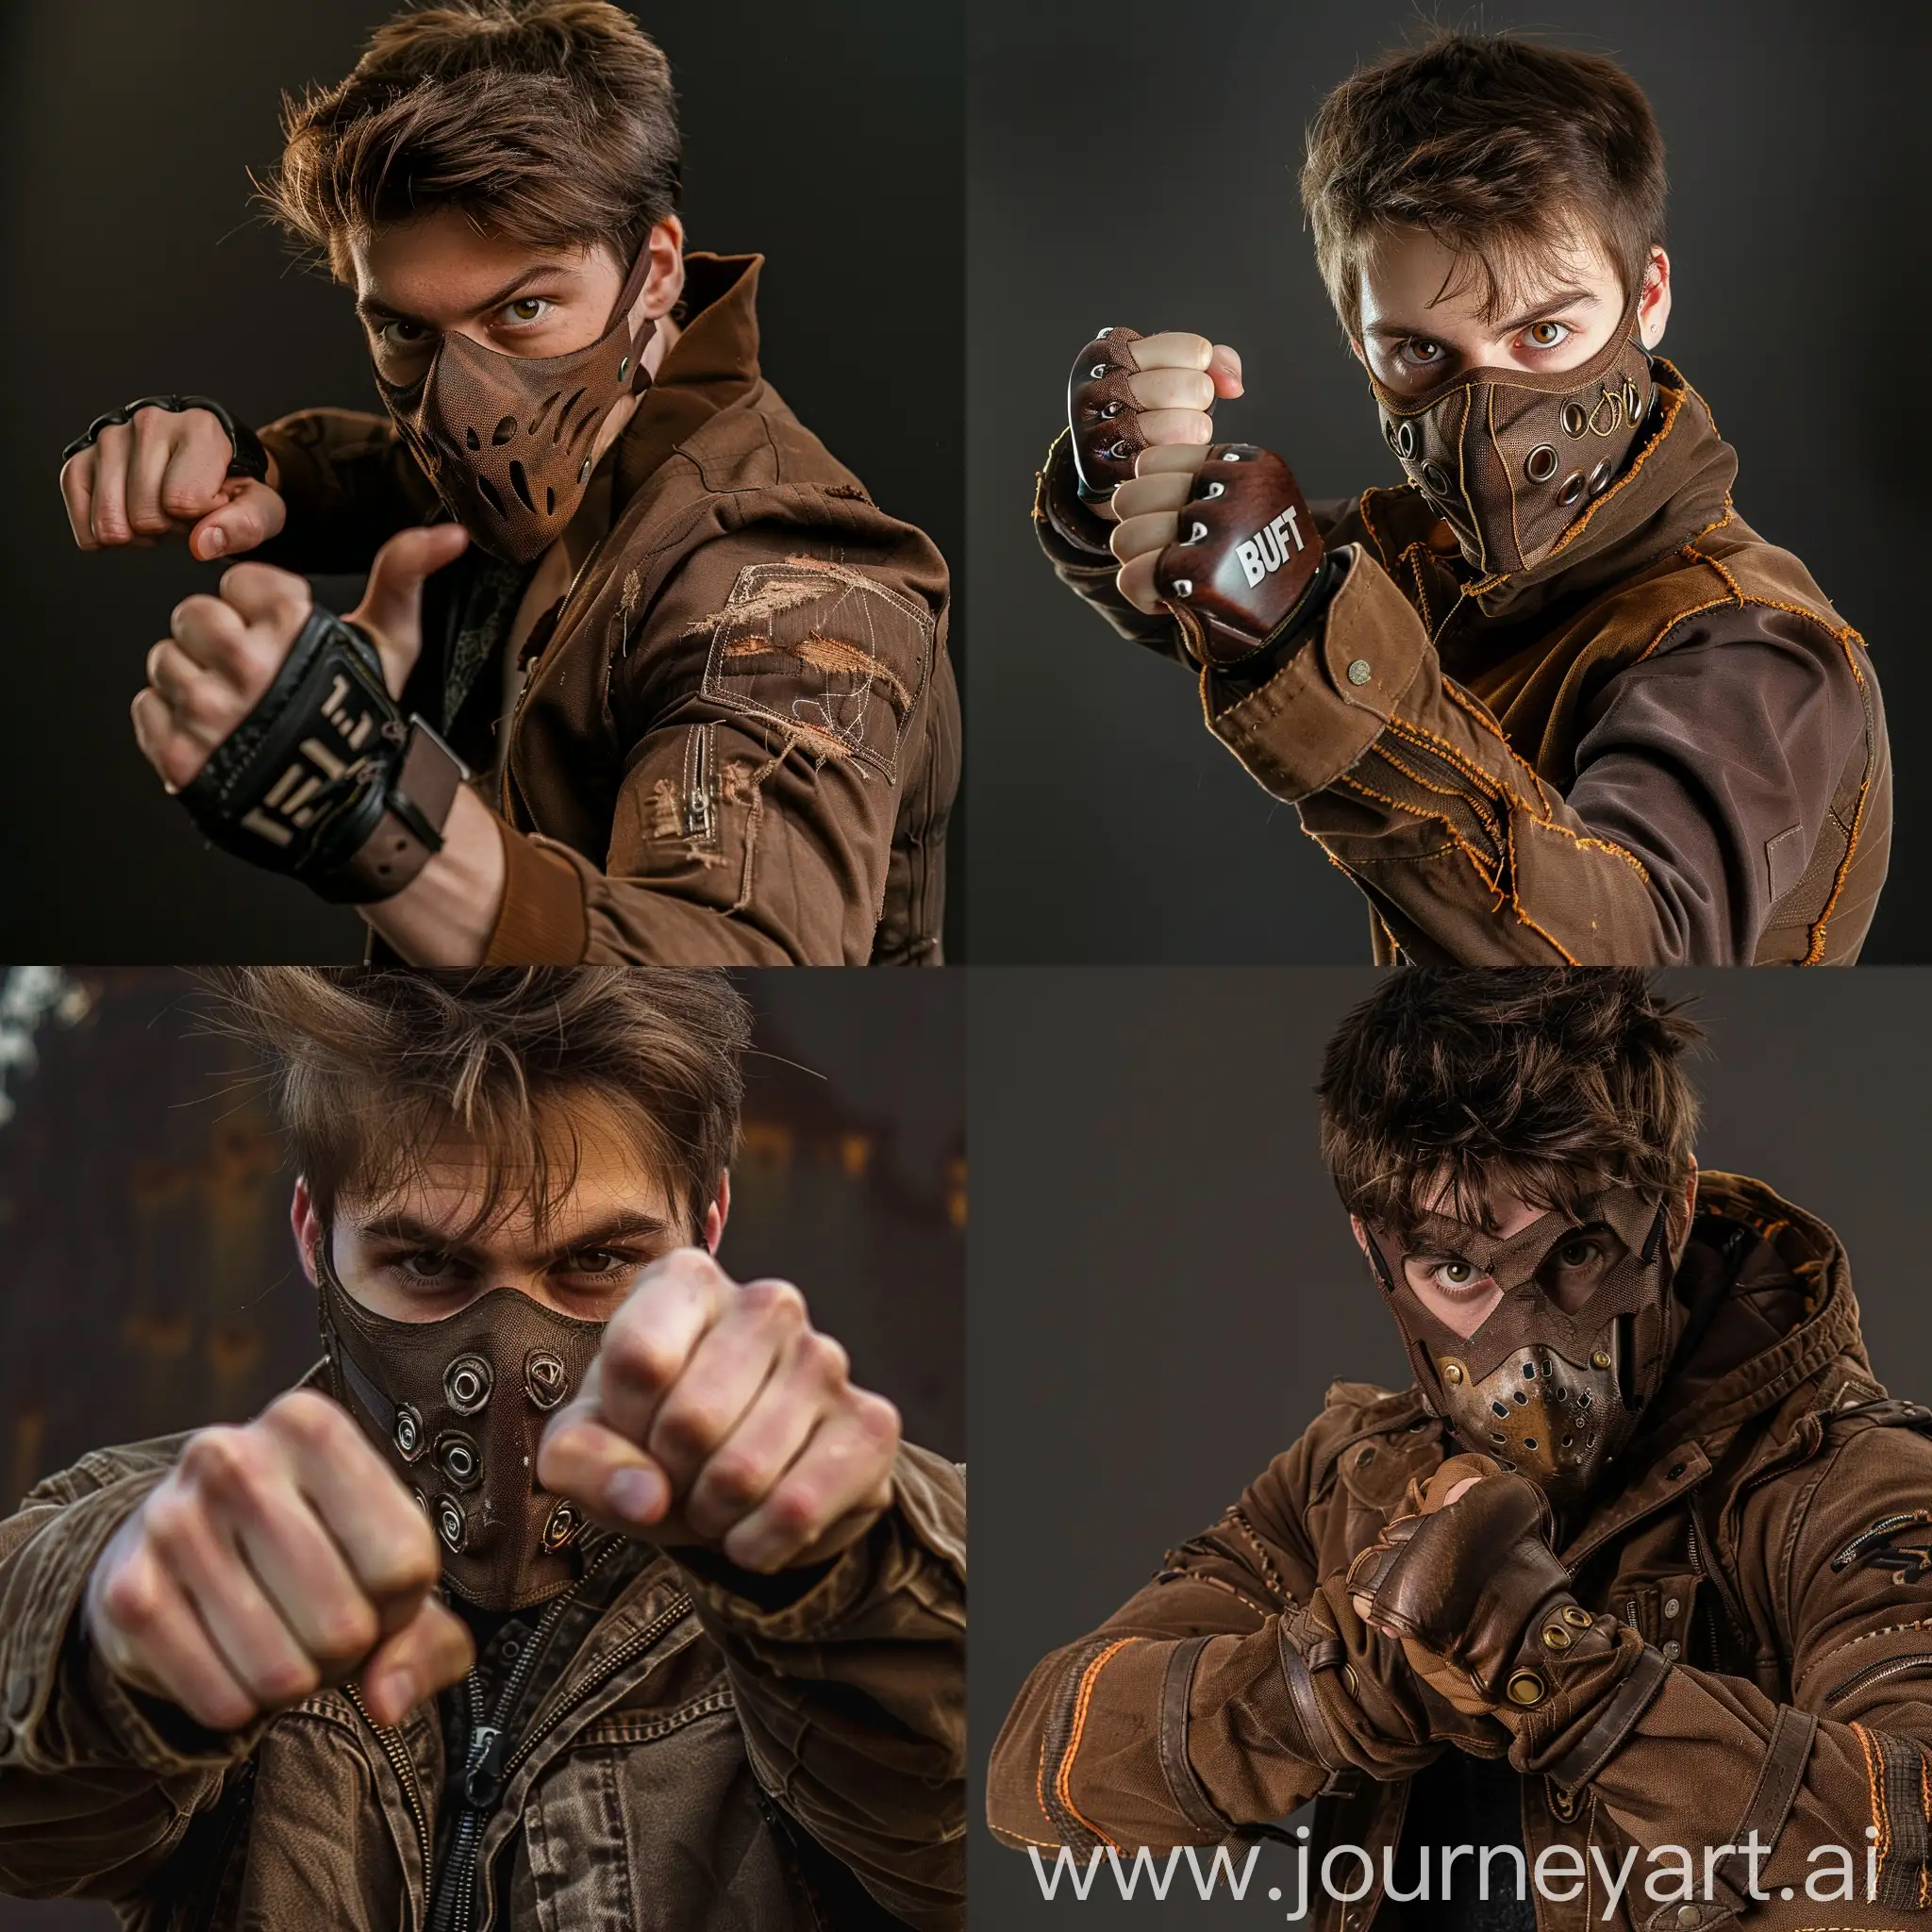 Confident-Fighter-in-Brown-Jacket-and-Mask-Striking-a-Dynamic-Pose